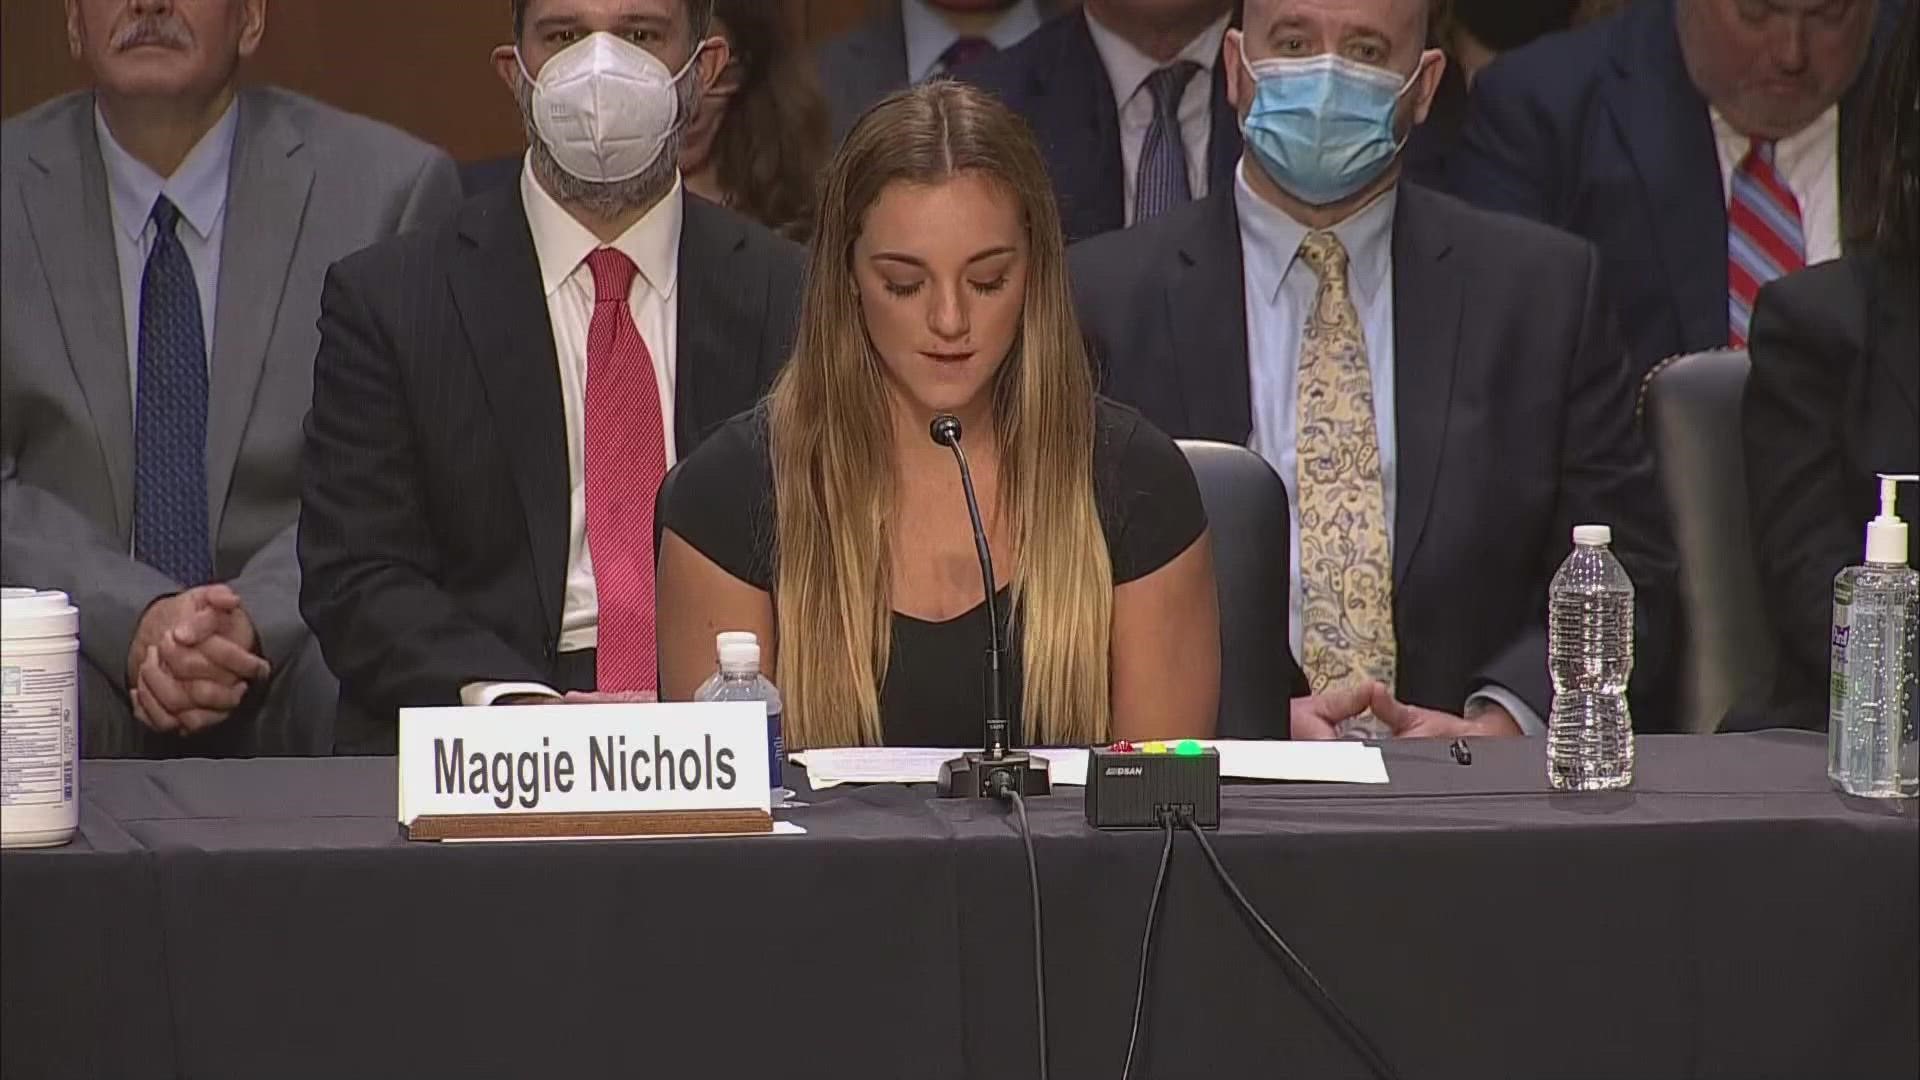 Nichols said she reported the abuse to USA Gymnastics over six years ago, which went ignored. Several other gymnasts were abused by Nassar after that report.